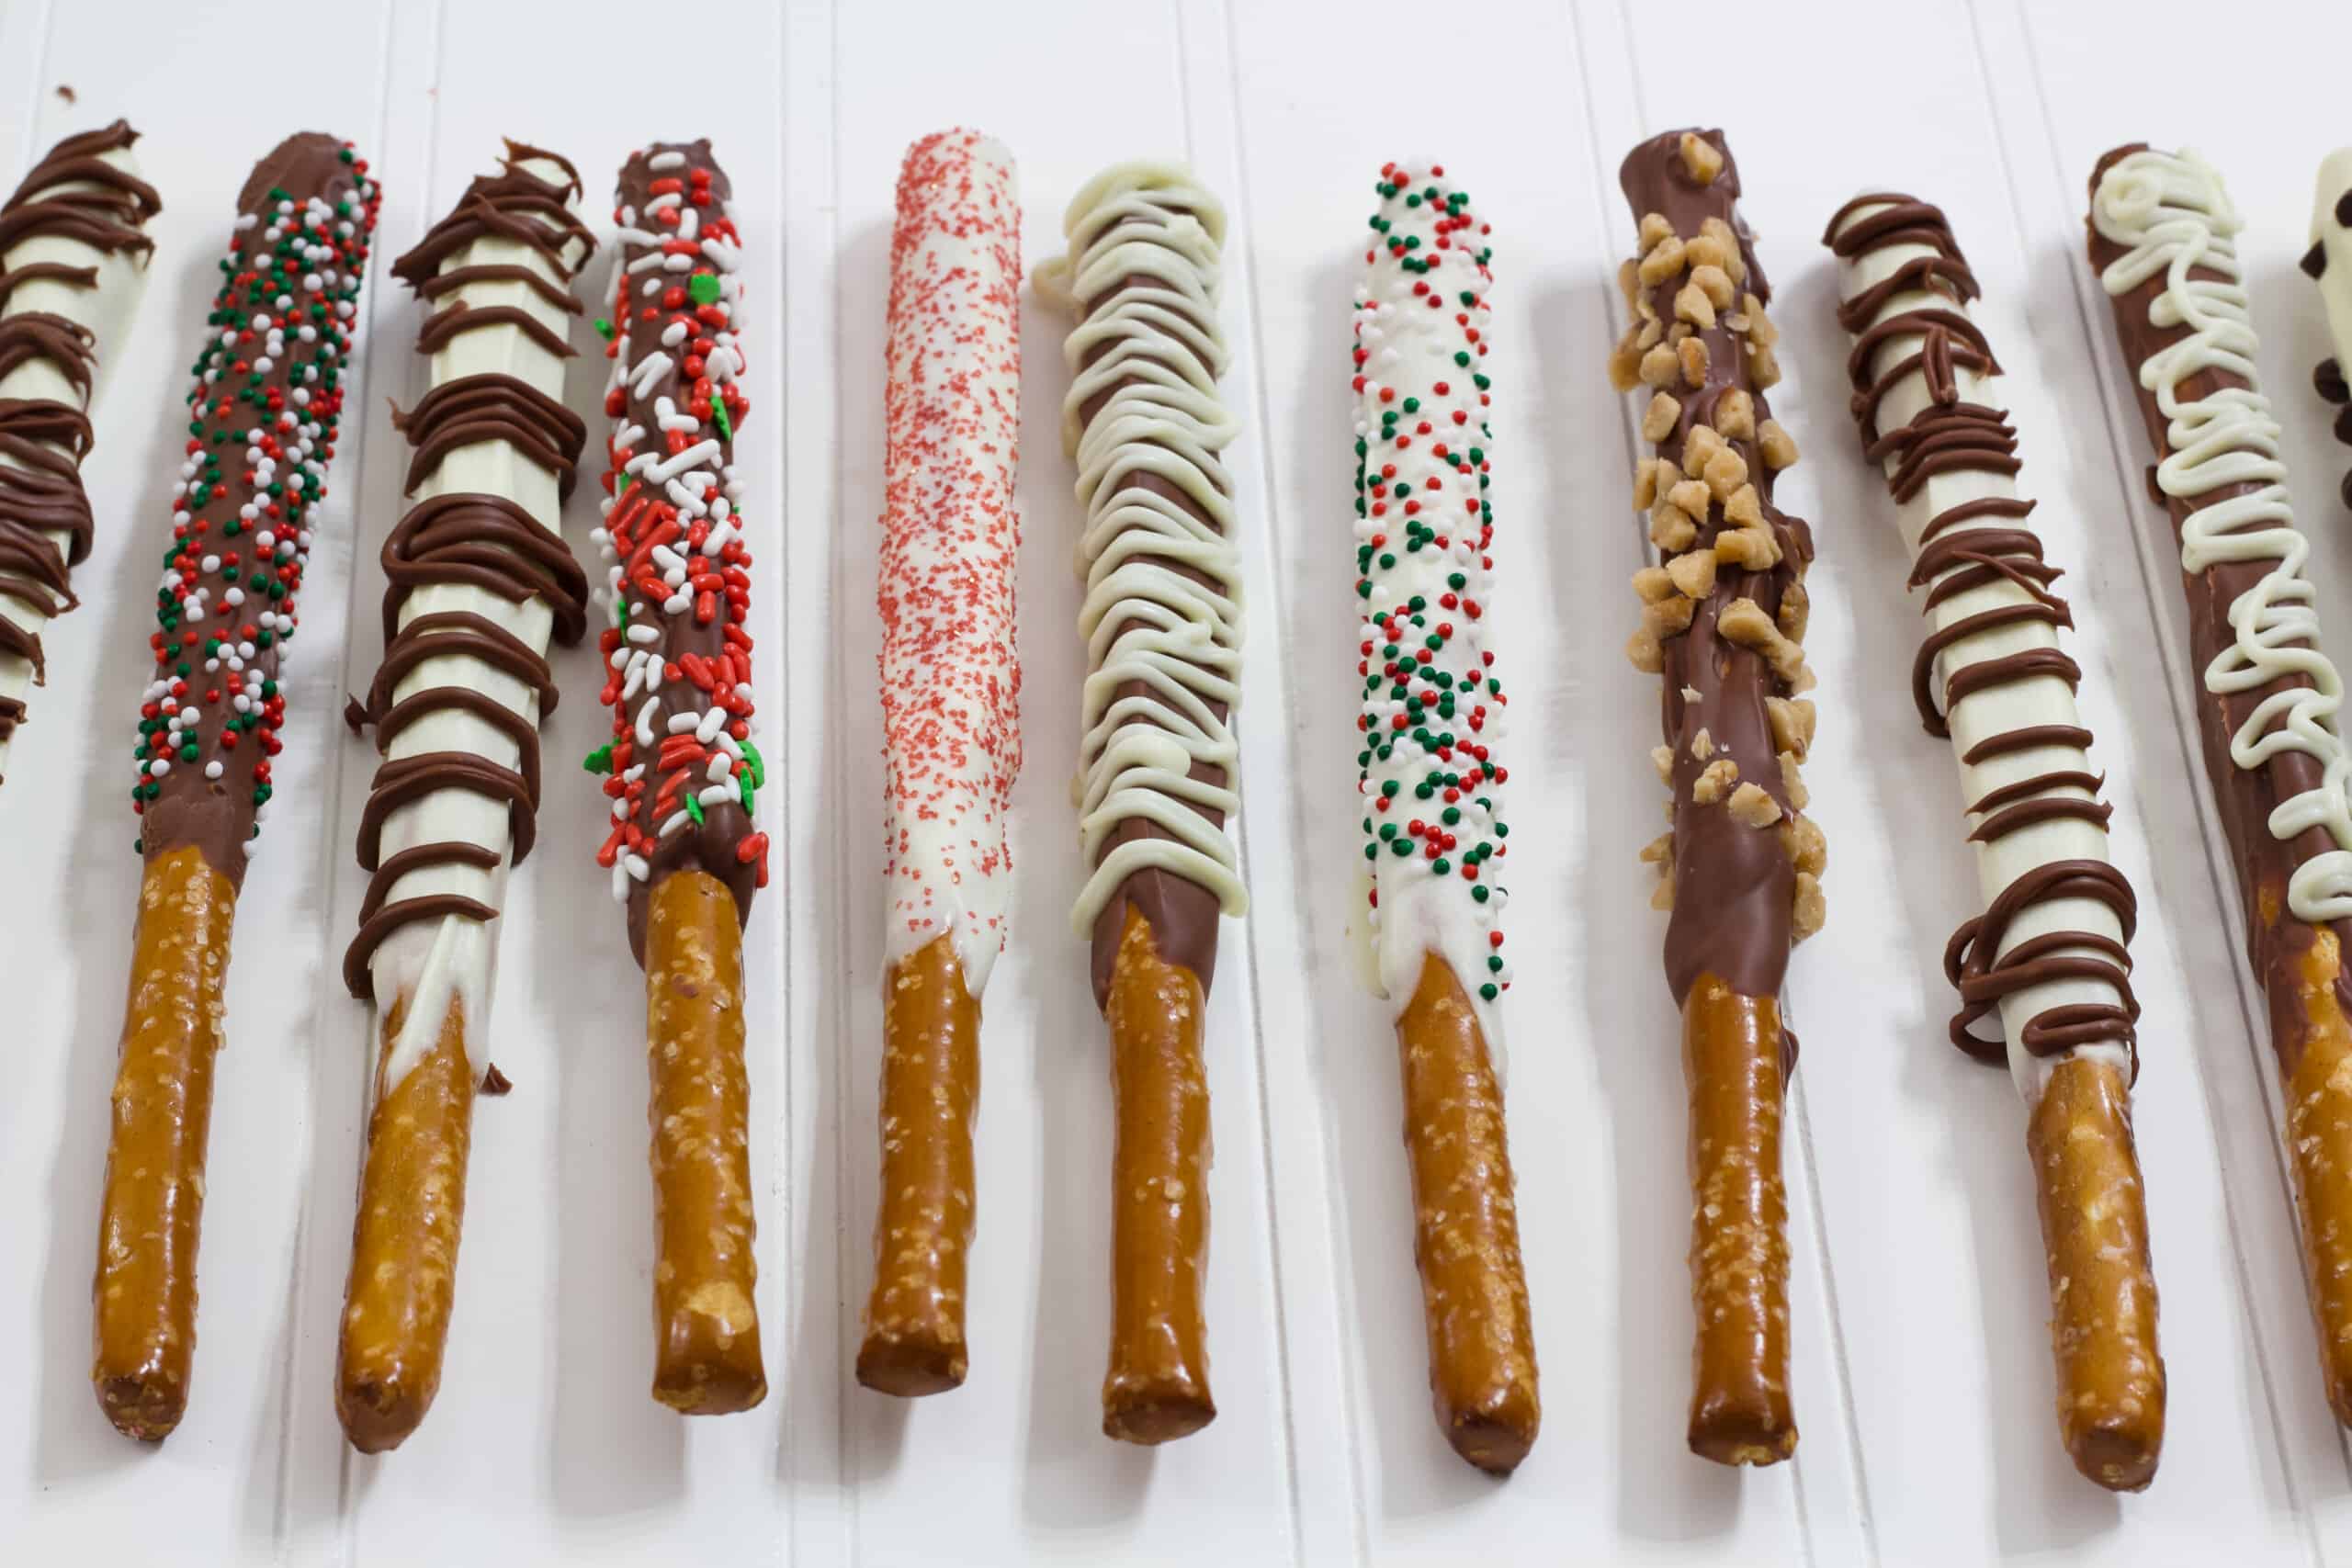 Many chocolate covered pretzel rods laying on a white background. They have various red and green sprinkles on them.